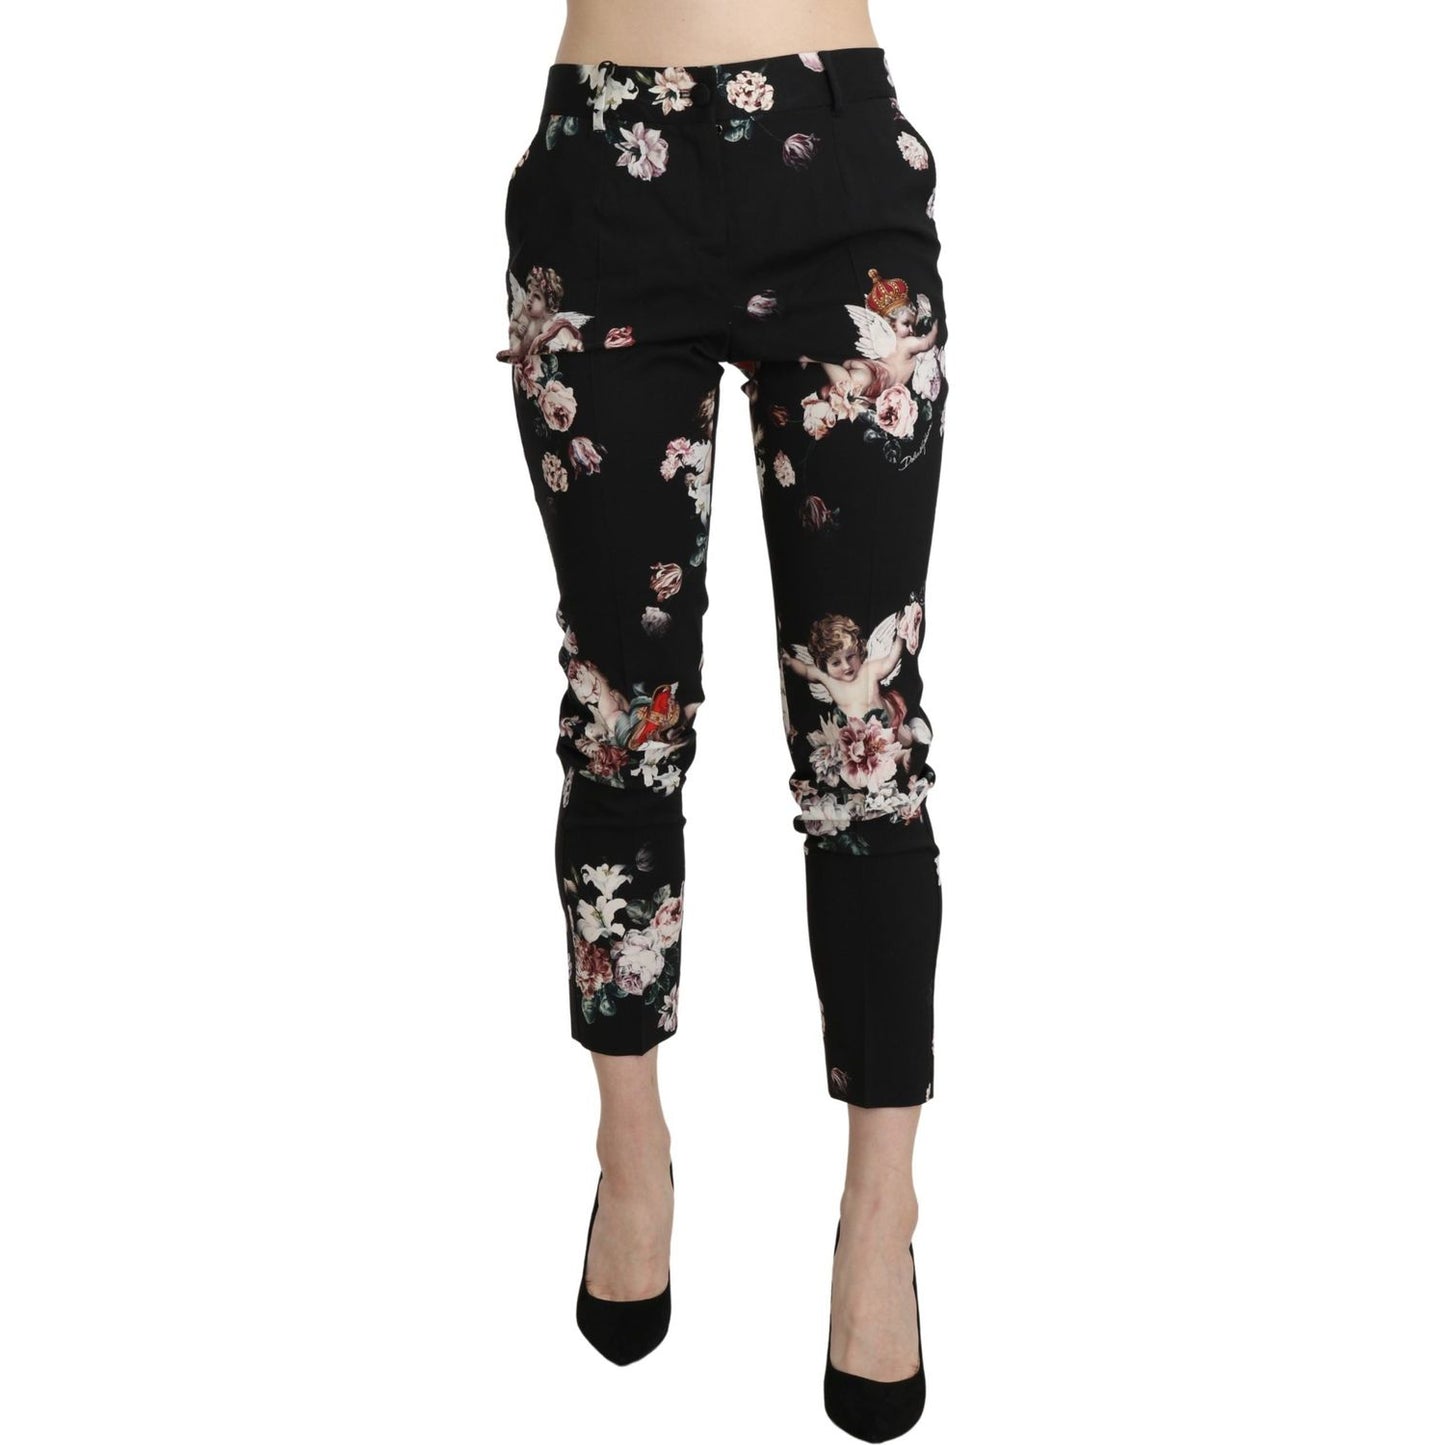 Dolce & Gabbana Elegant High Waist Cropped Trousers black-angel-floral-cropped-trouser-wool-pants Jeans & Pants IMG_0963-scaled-a7d5cdf2-5bc.jpg